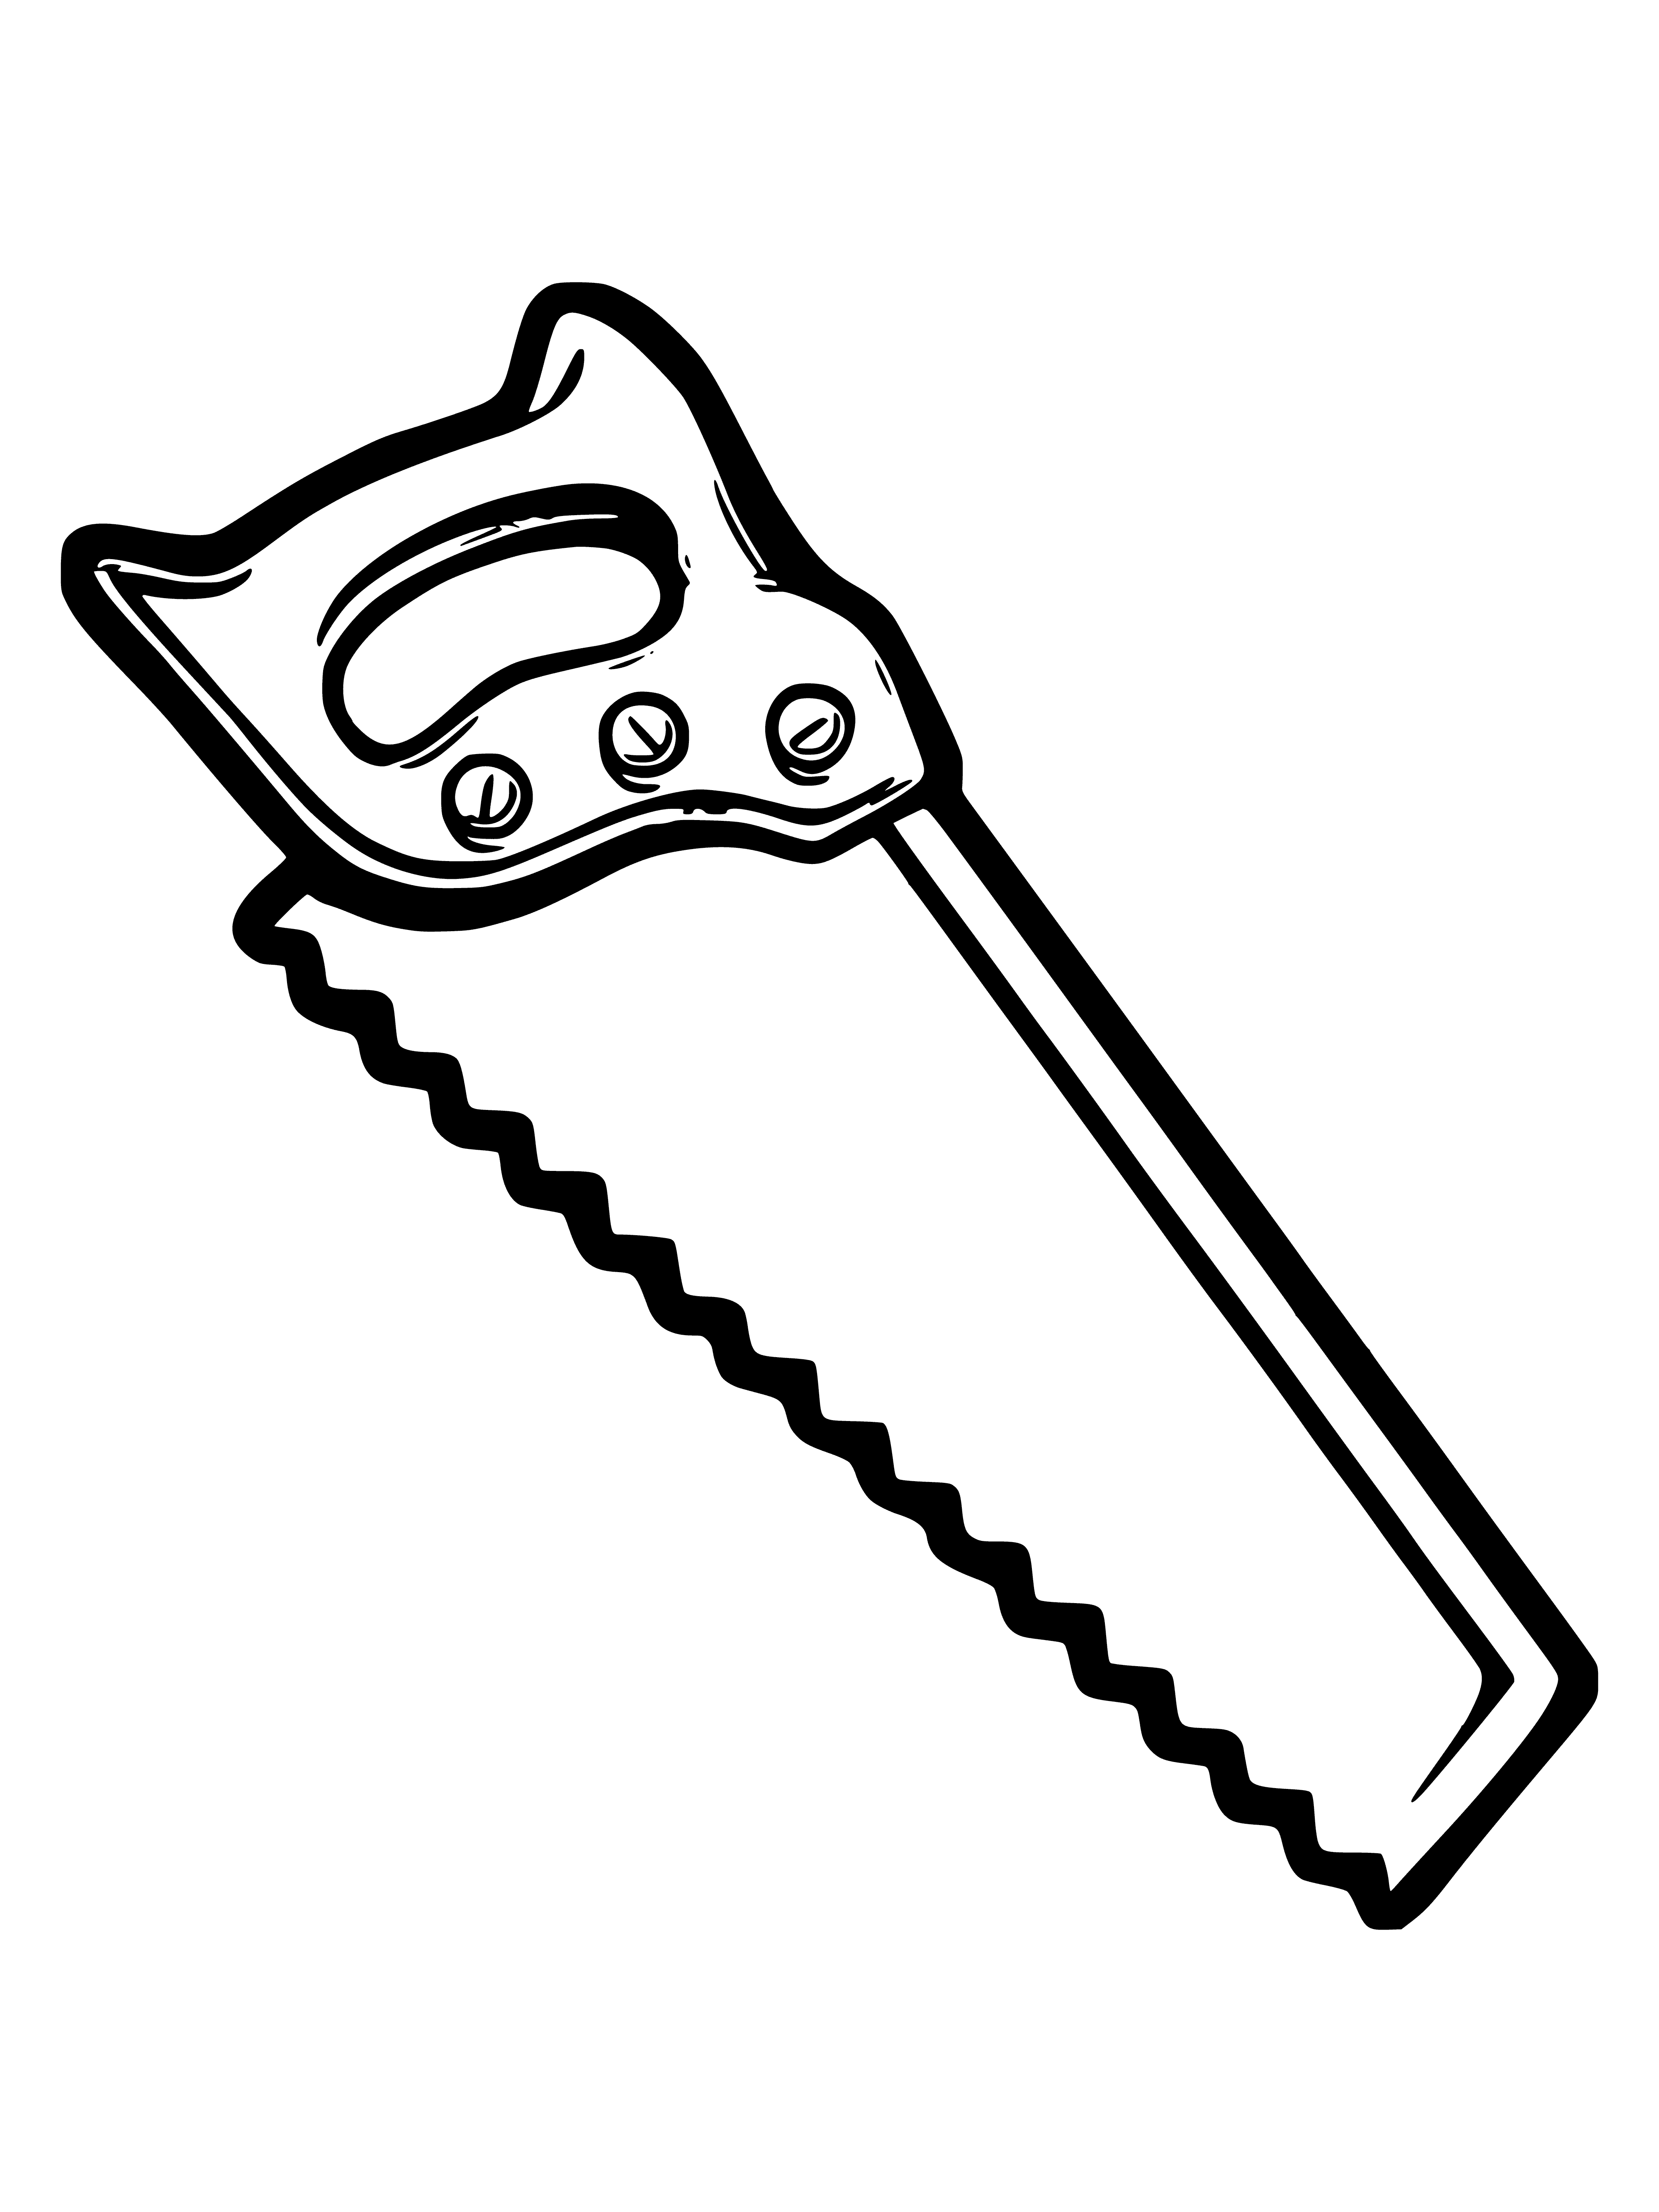 coloring page: Silver object with thin, curved blade & serrated edge has a black handle, medium-sized.